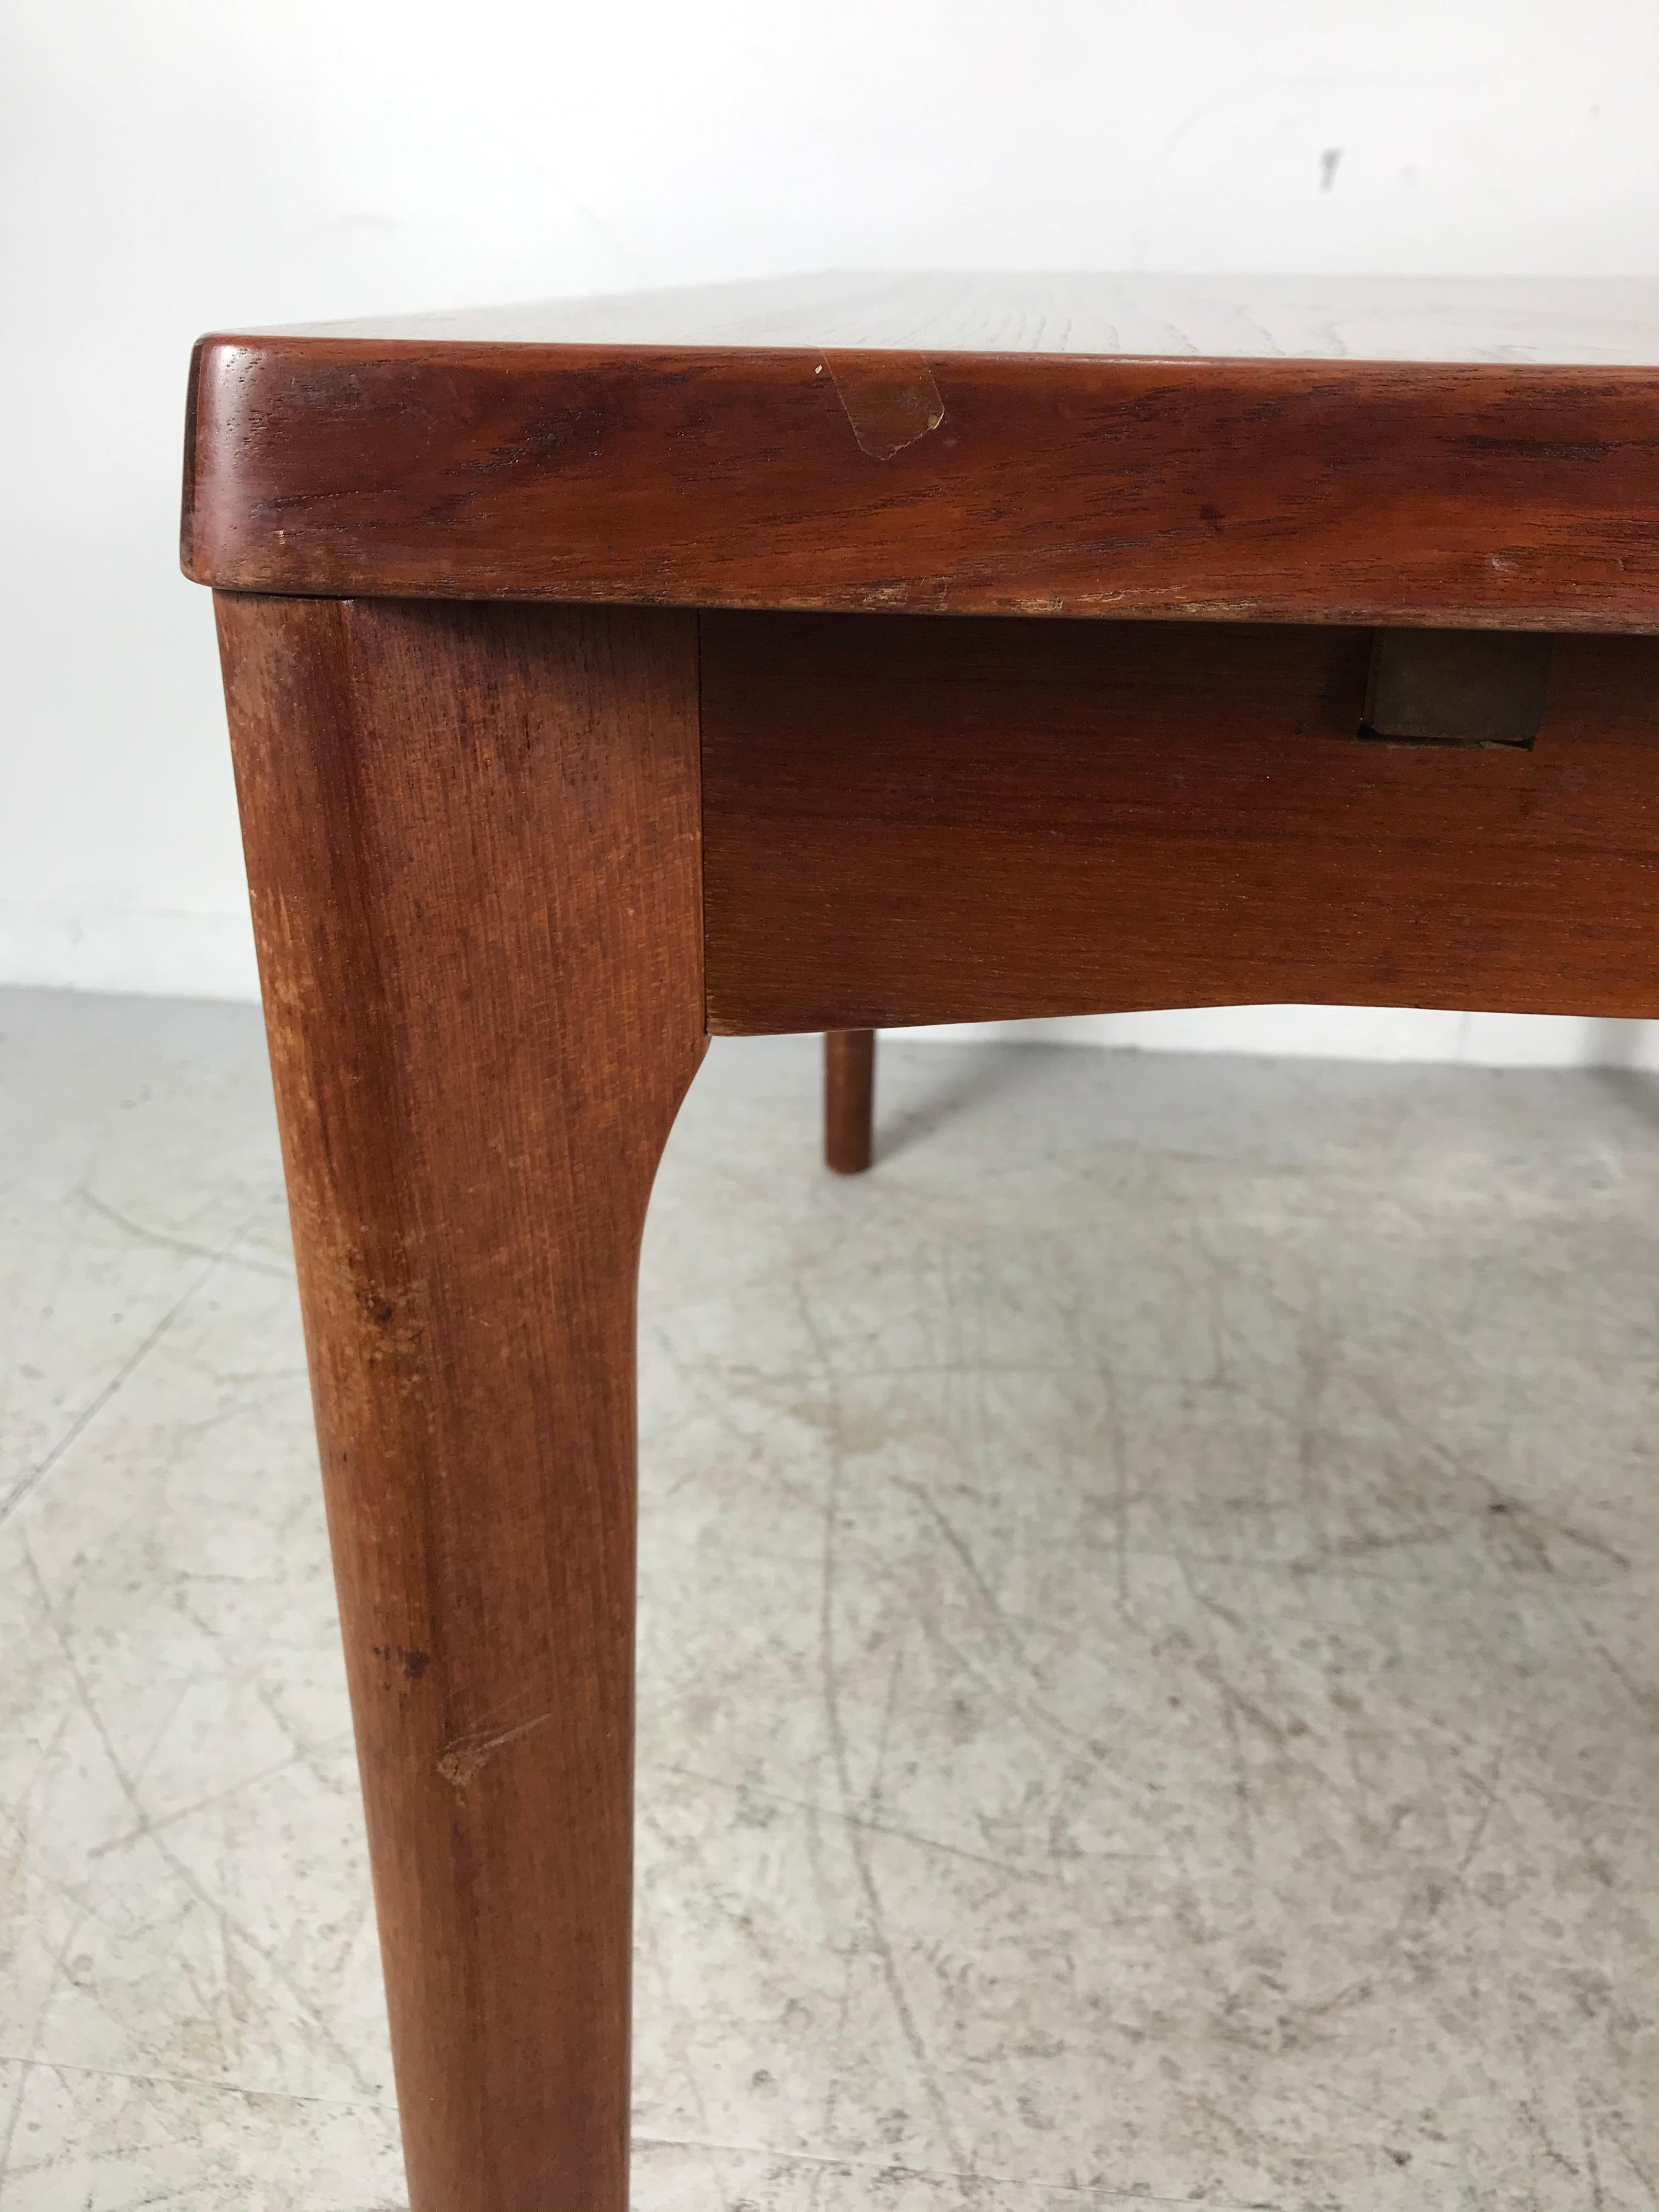 Danish modernist design extendable dining room table /desk in rosewood
The extension leaves are nicely integrated into the design, stored under the tabletop, so that the table is both folded and unfolded nice to look at.
Special about this table